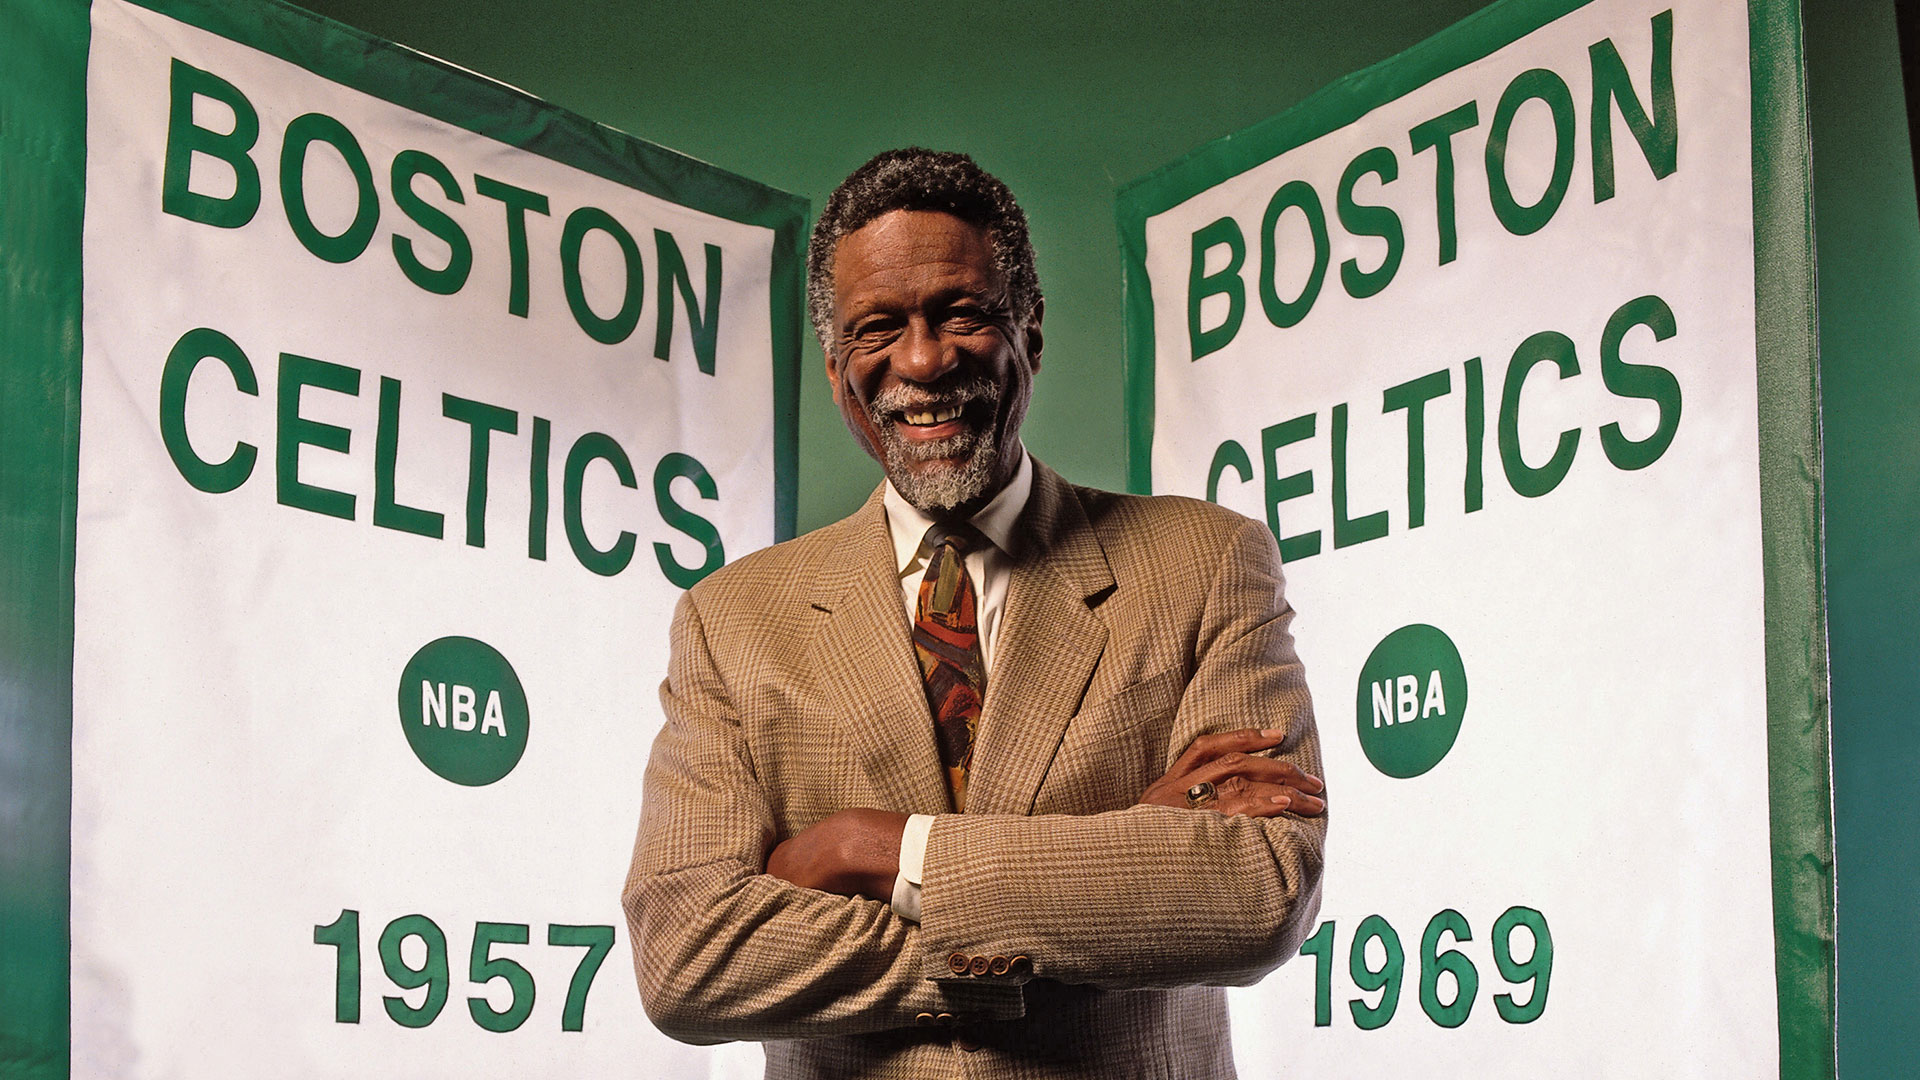 Boston Celtics green never veiled Bill Russell's unapologetic